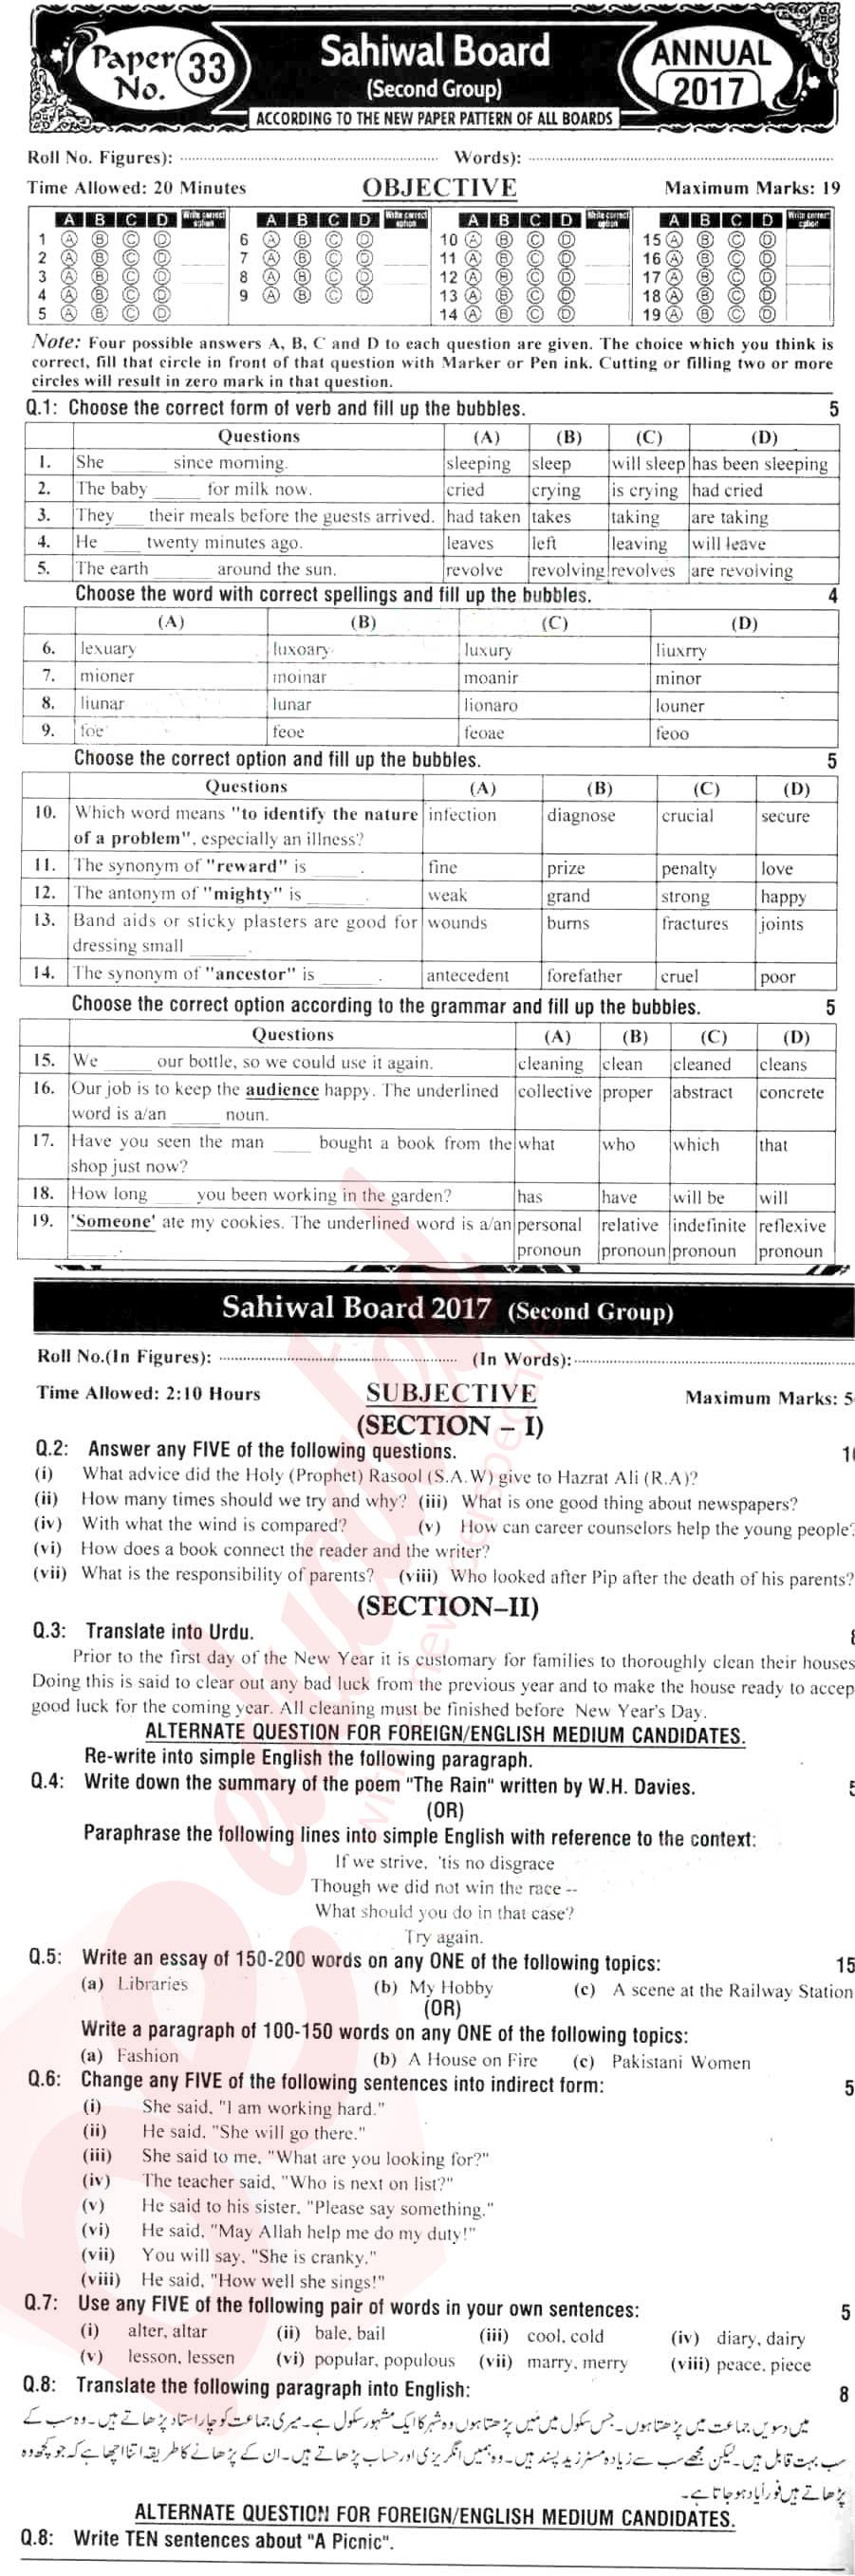 English 10th class Past Paper Group 2 BISE Sahiwal 2017